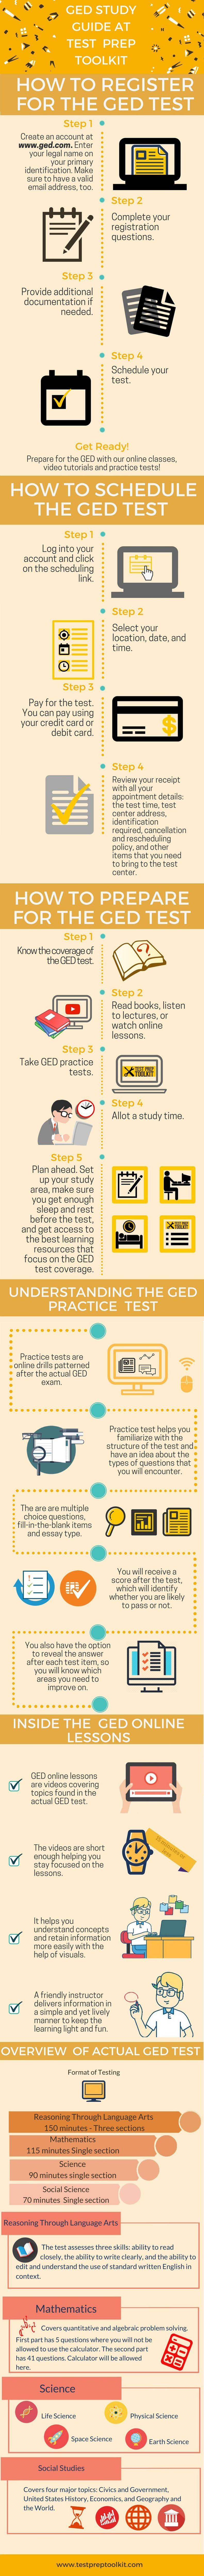 Perfect Way To Prepare For GED Test Infographic